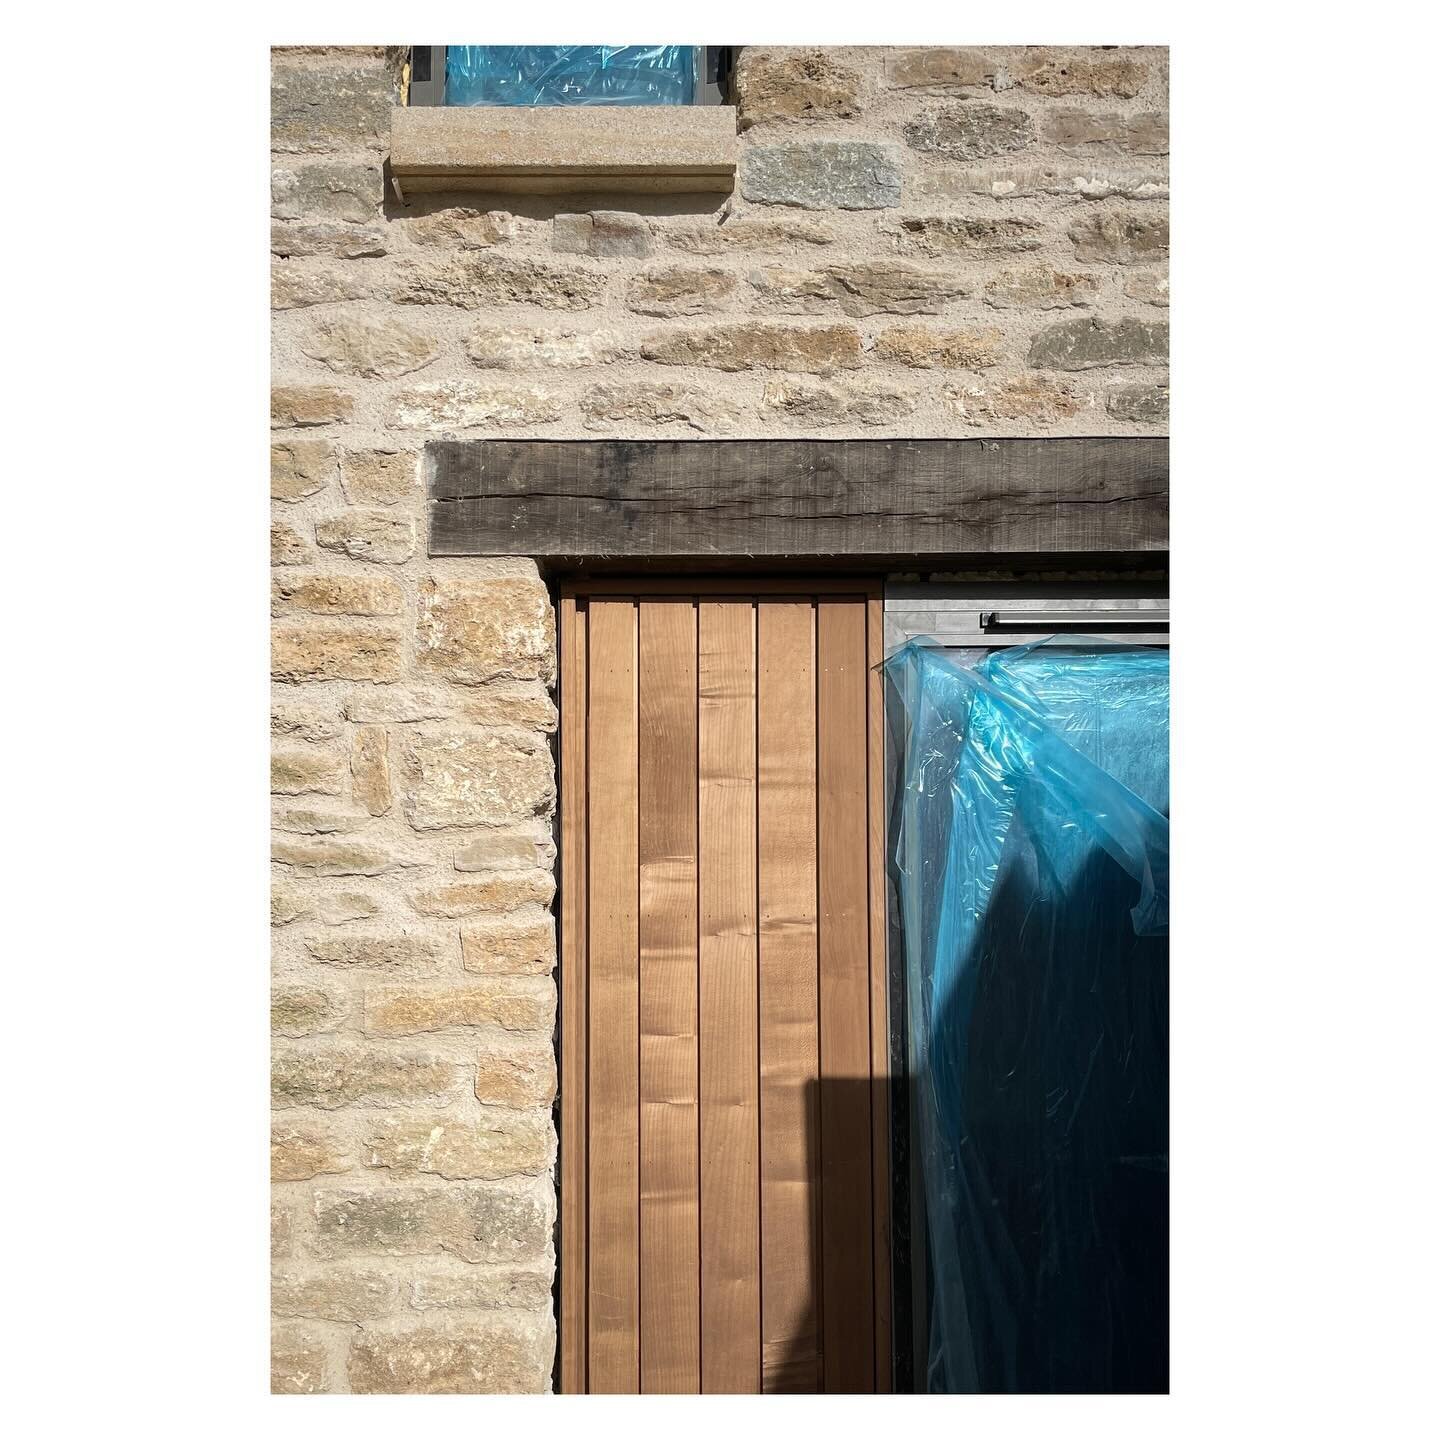 | Hemington Barn

Details are coming together in our barn conversion and extension in Somerset with @coreconstructionbath 

New and existing window openings are being infilled with fixed metal framed glazing and bespoke timber boarded shutters for ve